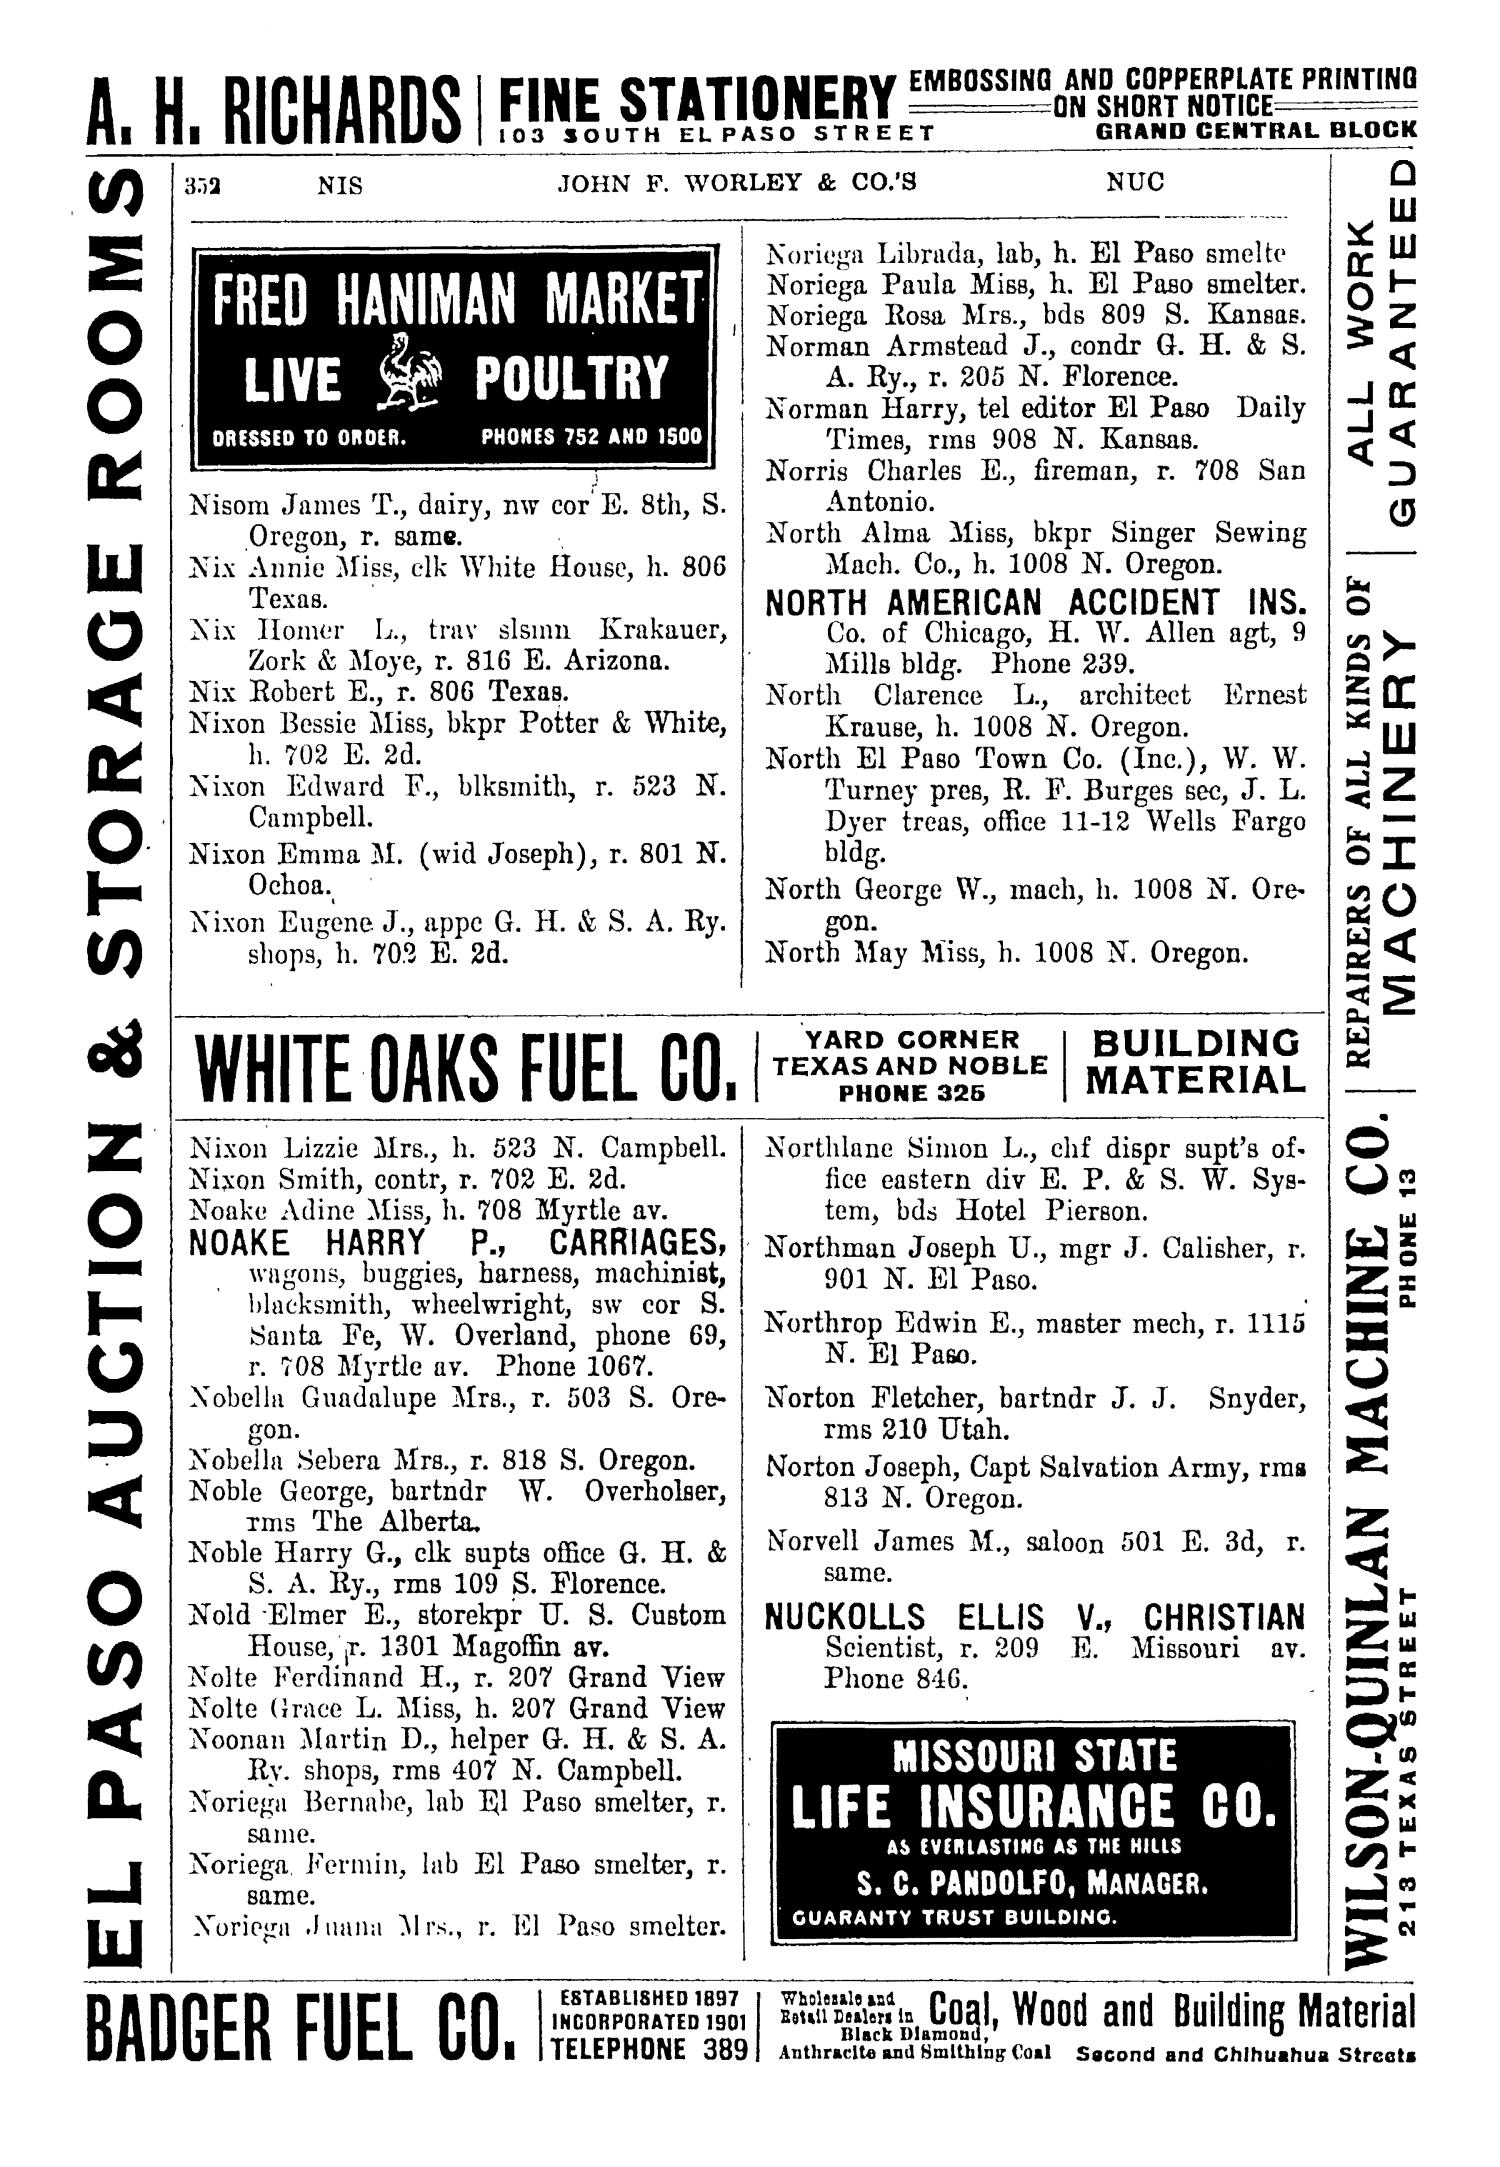 John F. Worley & Co.'s El Paso Directory for 1906
                                                
                                                    352
                                                